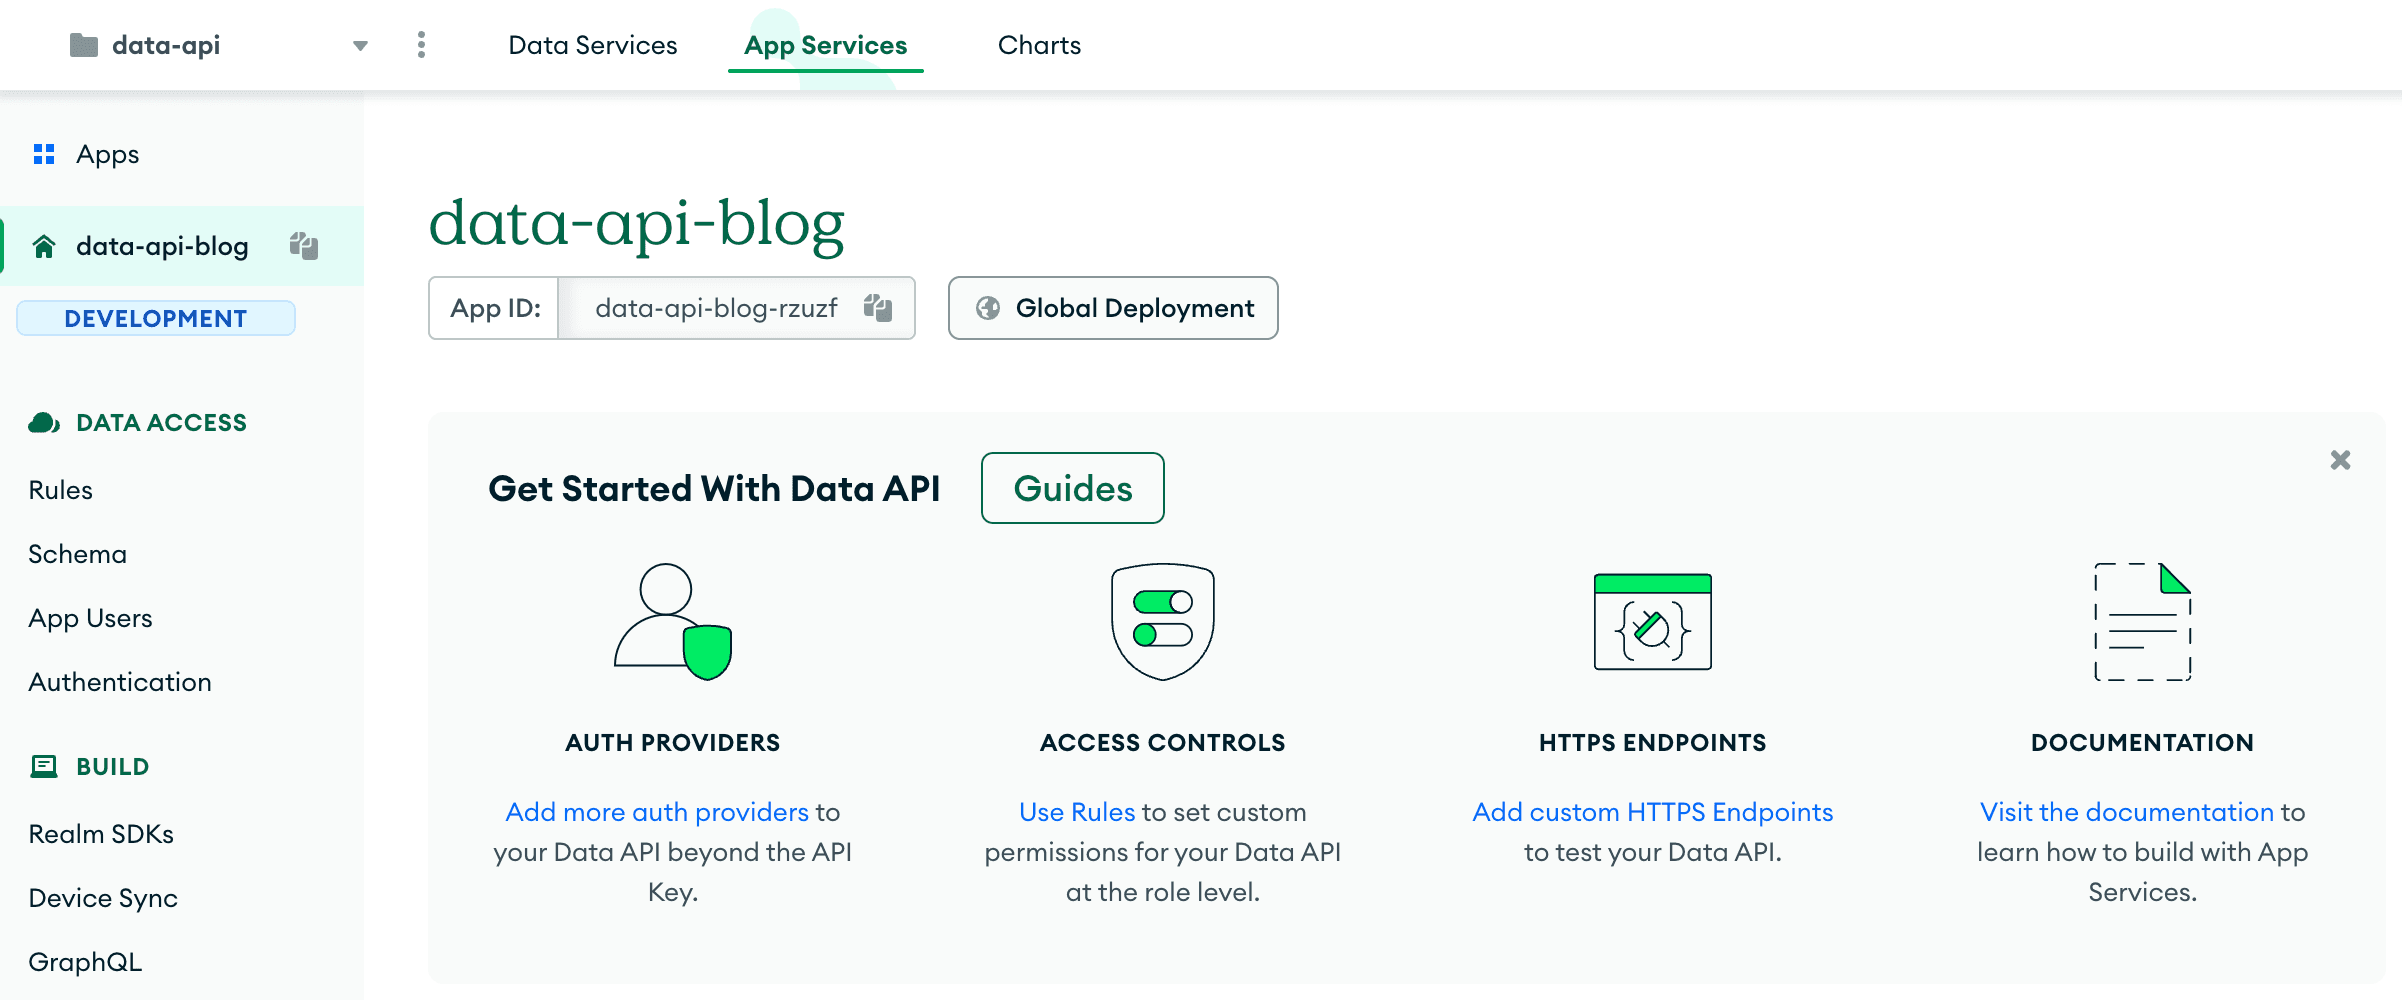 The application is visible now through Atlas UI, in the App Services tab